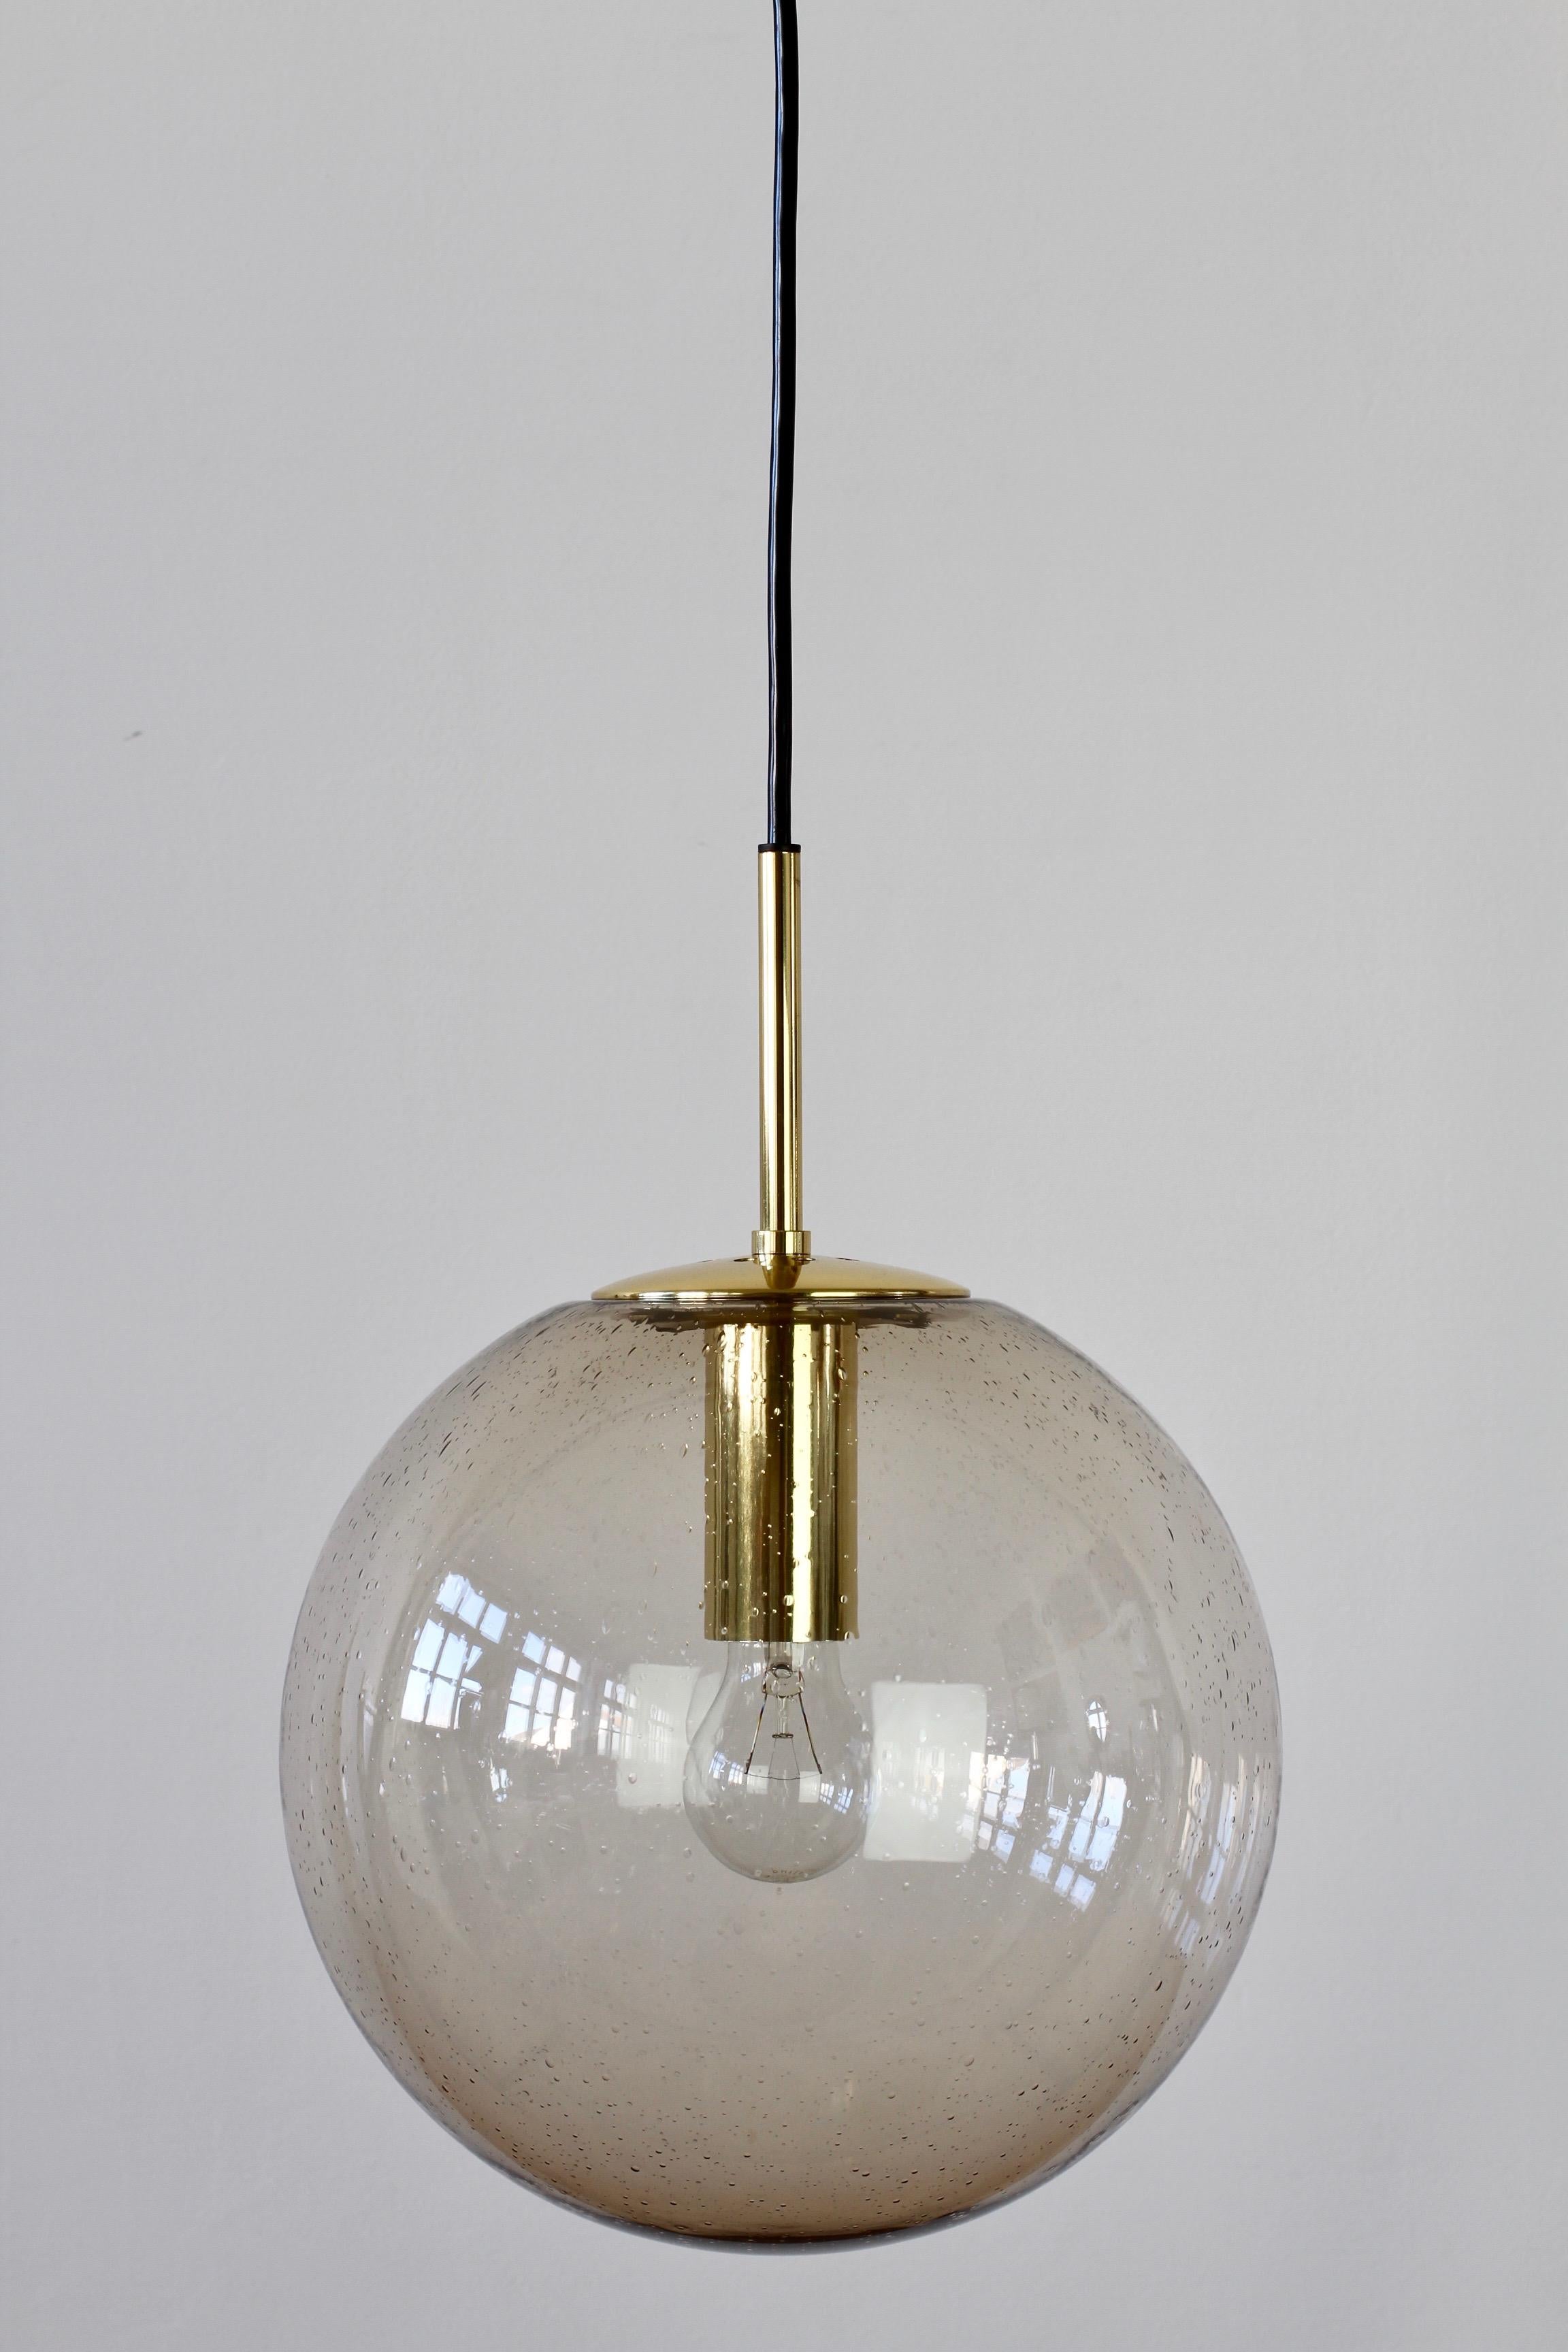 'New old stock' in original box large midcentury hanging pendant lamp / light fixture by Glashütte Limburg. Made in Germany in the late 1960s throughout to the late 1970s, this gorgeous ceiling light features a mouth blown smoked glass globe